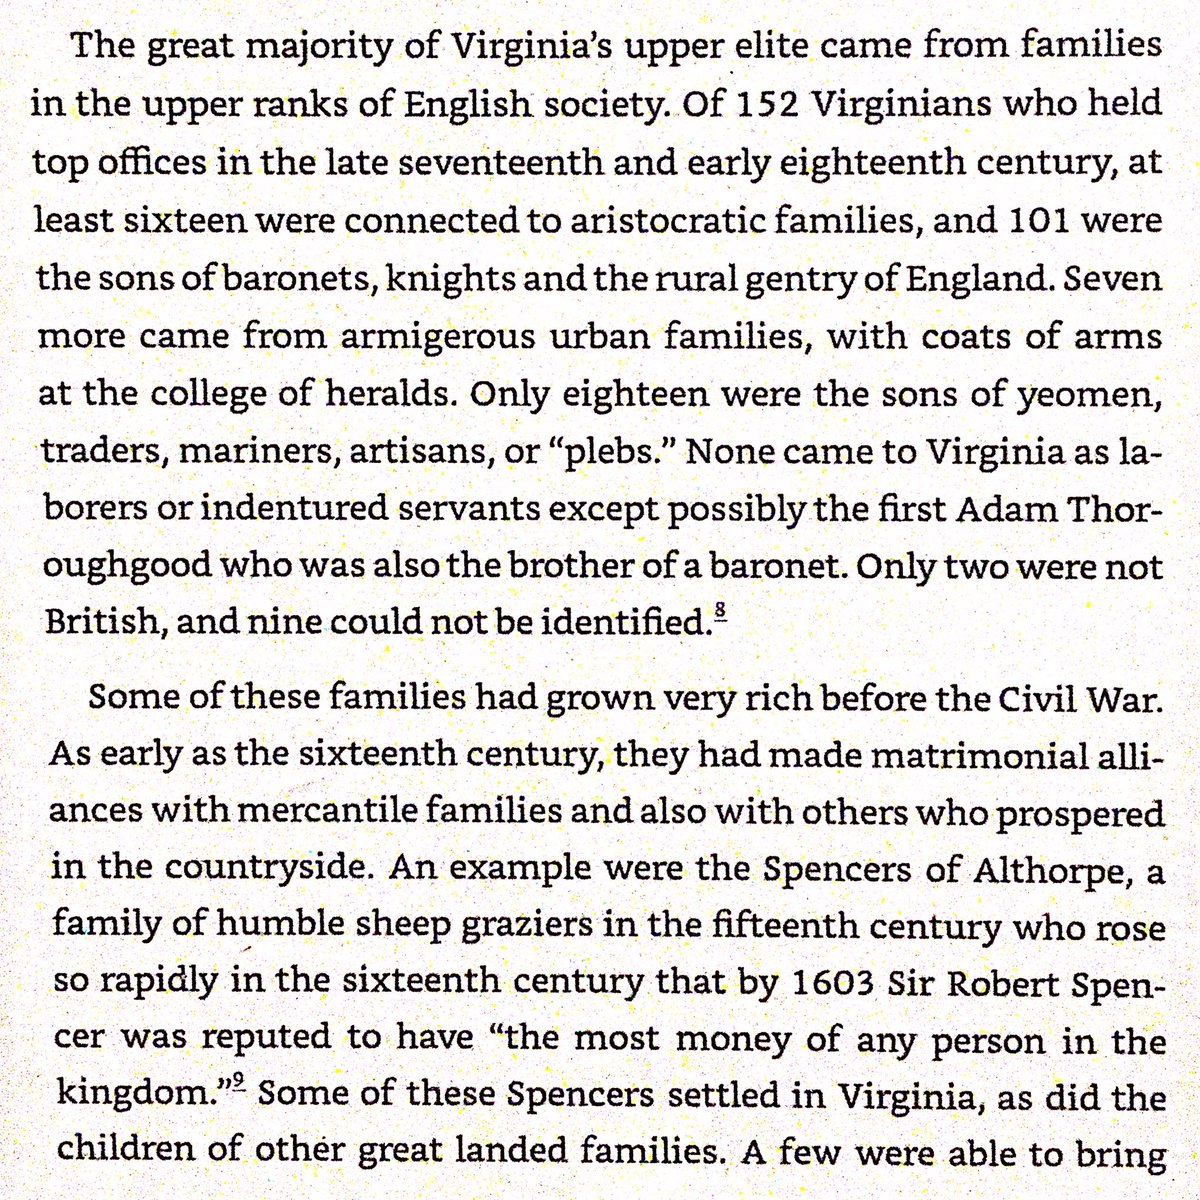 William Berkeley ruled Virginia 1642-1677. Population grew 8k -> 40k. He created a ruling class of exiled Anglican Royalist noblemen from the English Civil War, also bolstering their ranks with younger sons of noblemen.